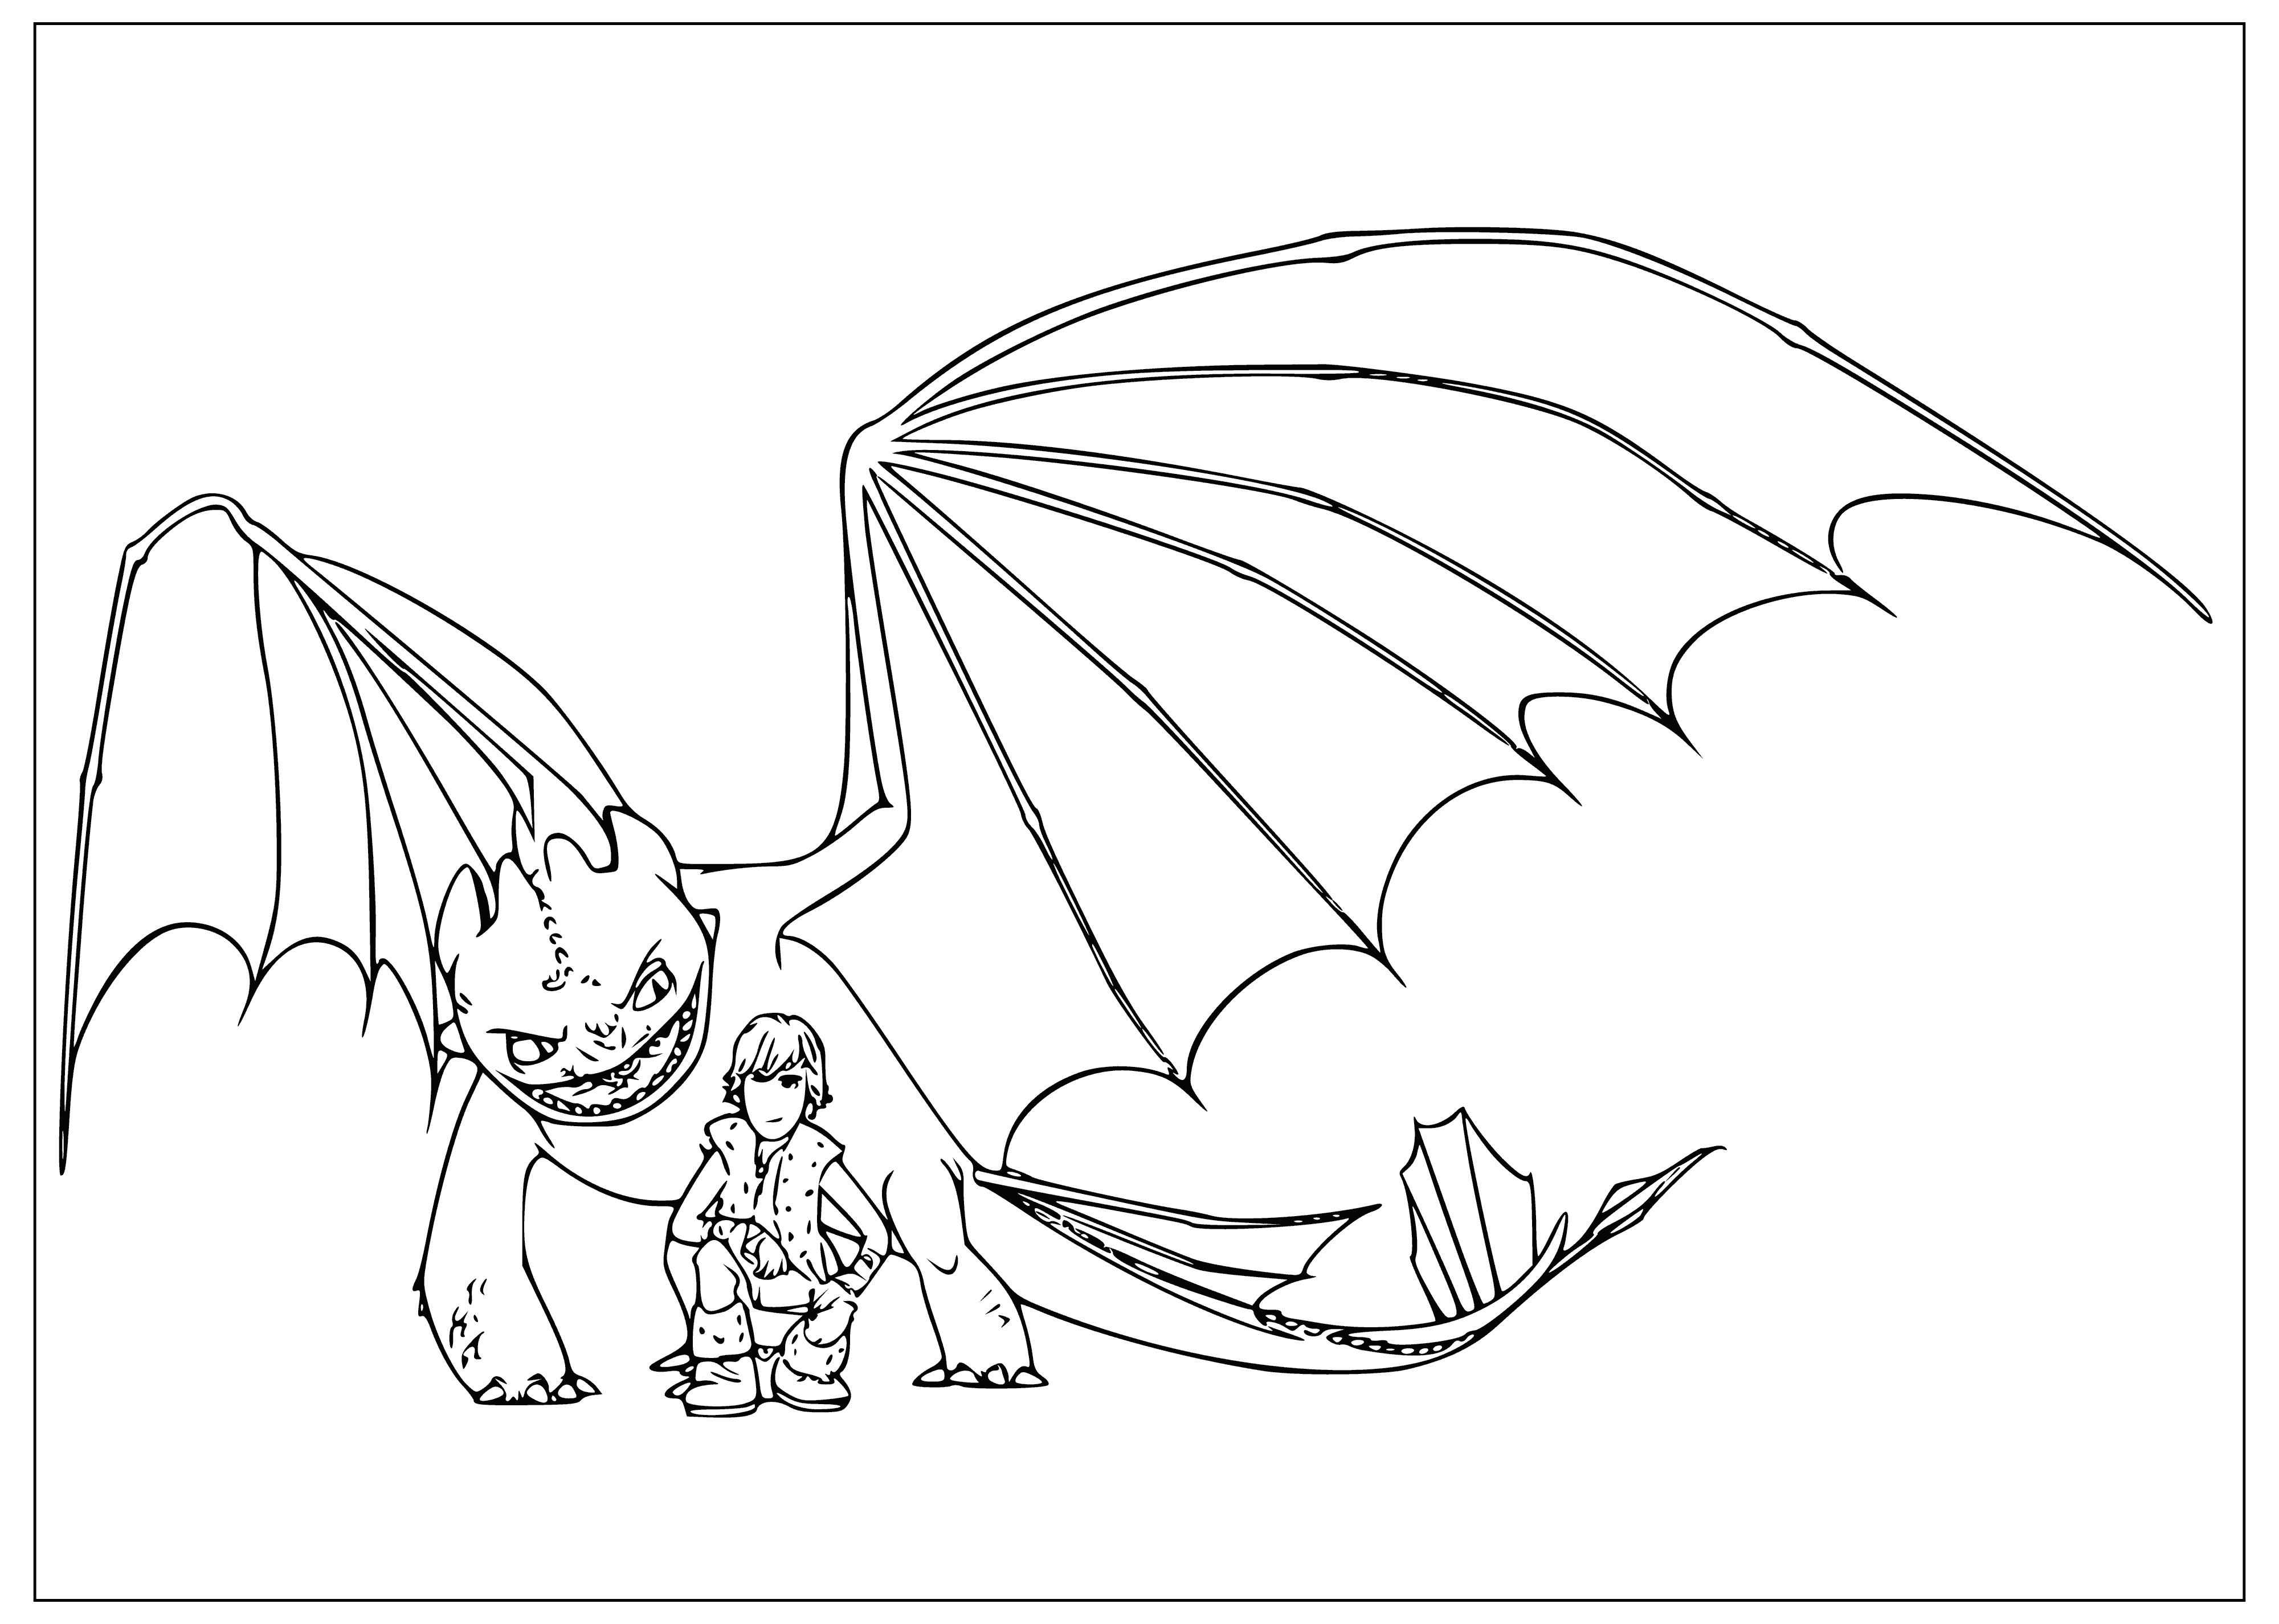 Bezzubik and Ikking coloring page